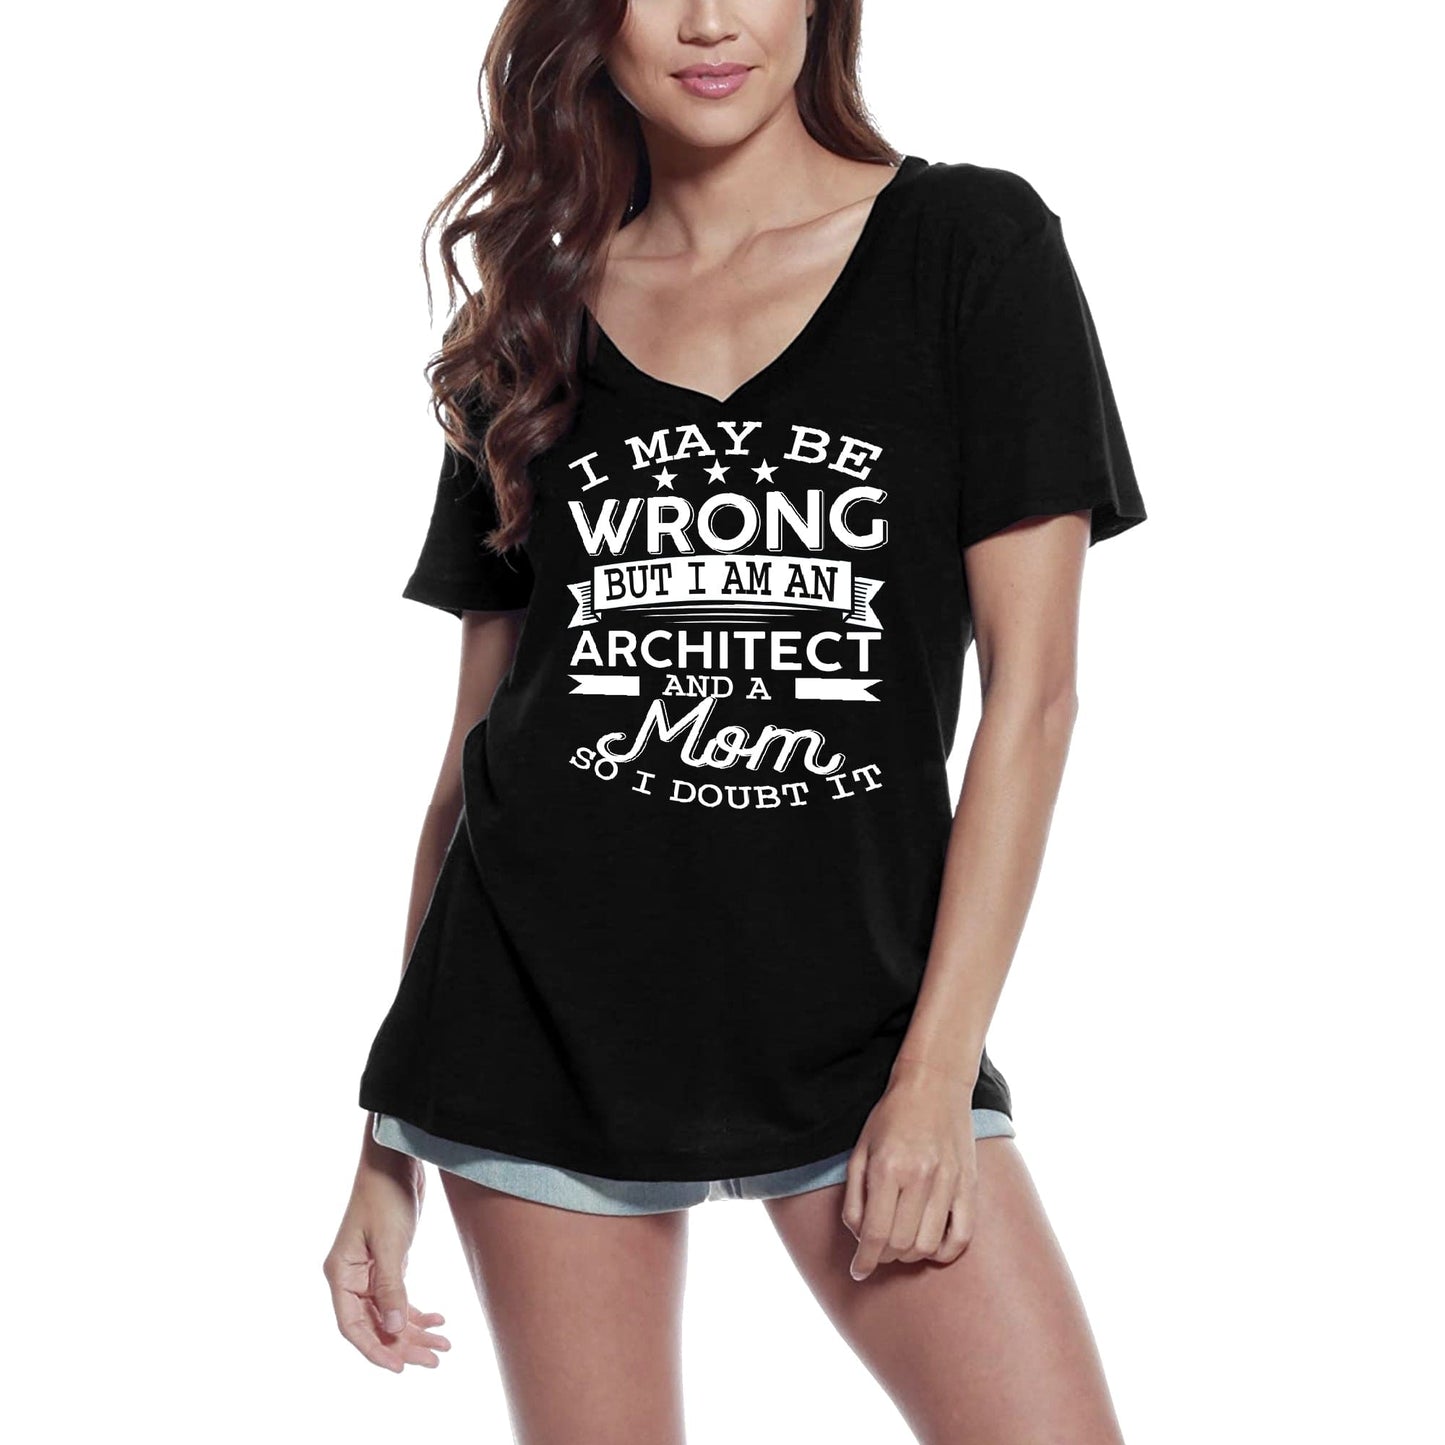 ULTRABASIC Women's T-Shirt I May be Wrong but I am an Architect and a Mom - Short Sleeve Tee Shirt Tops